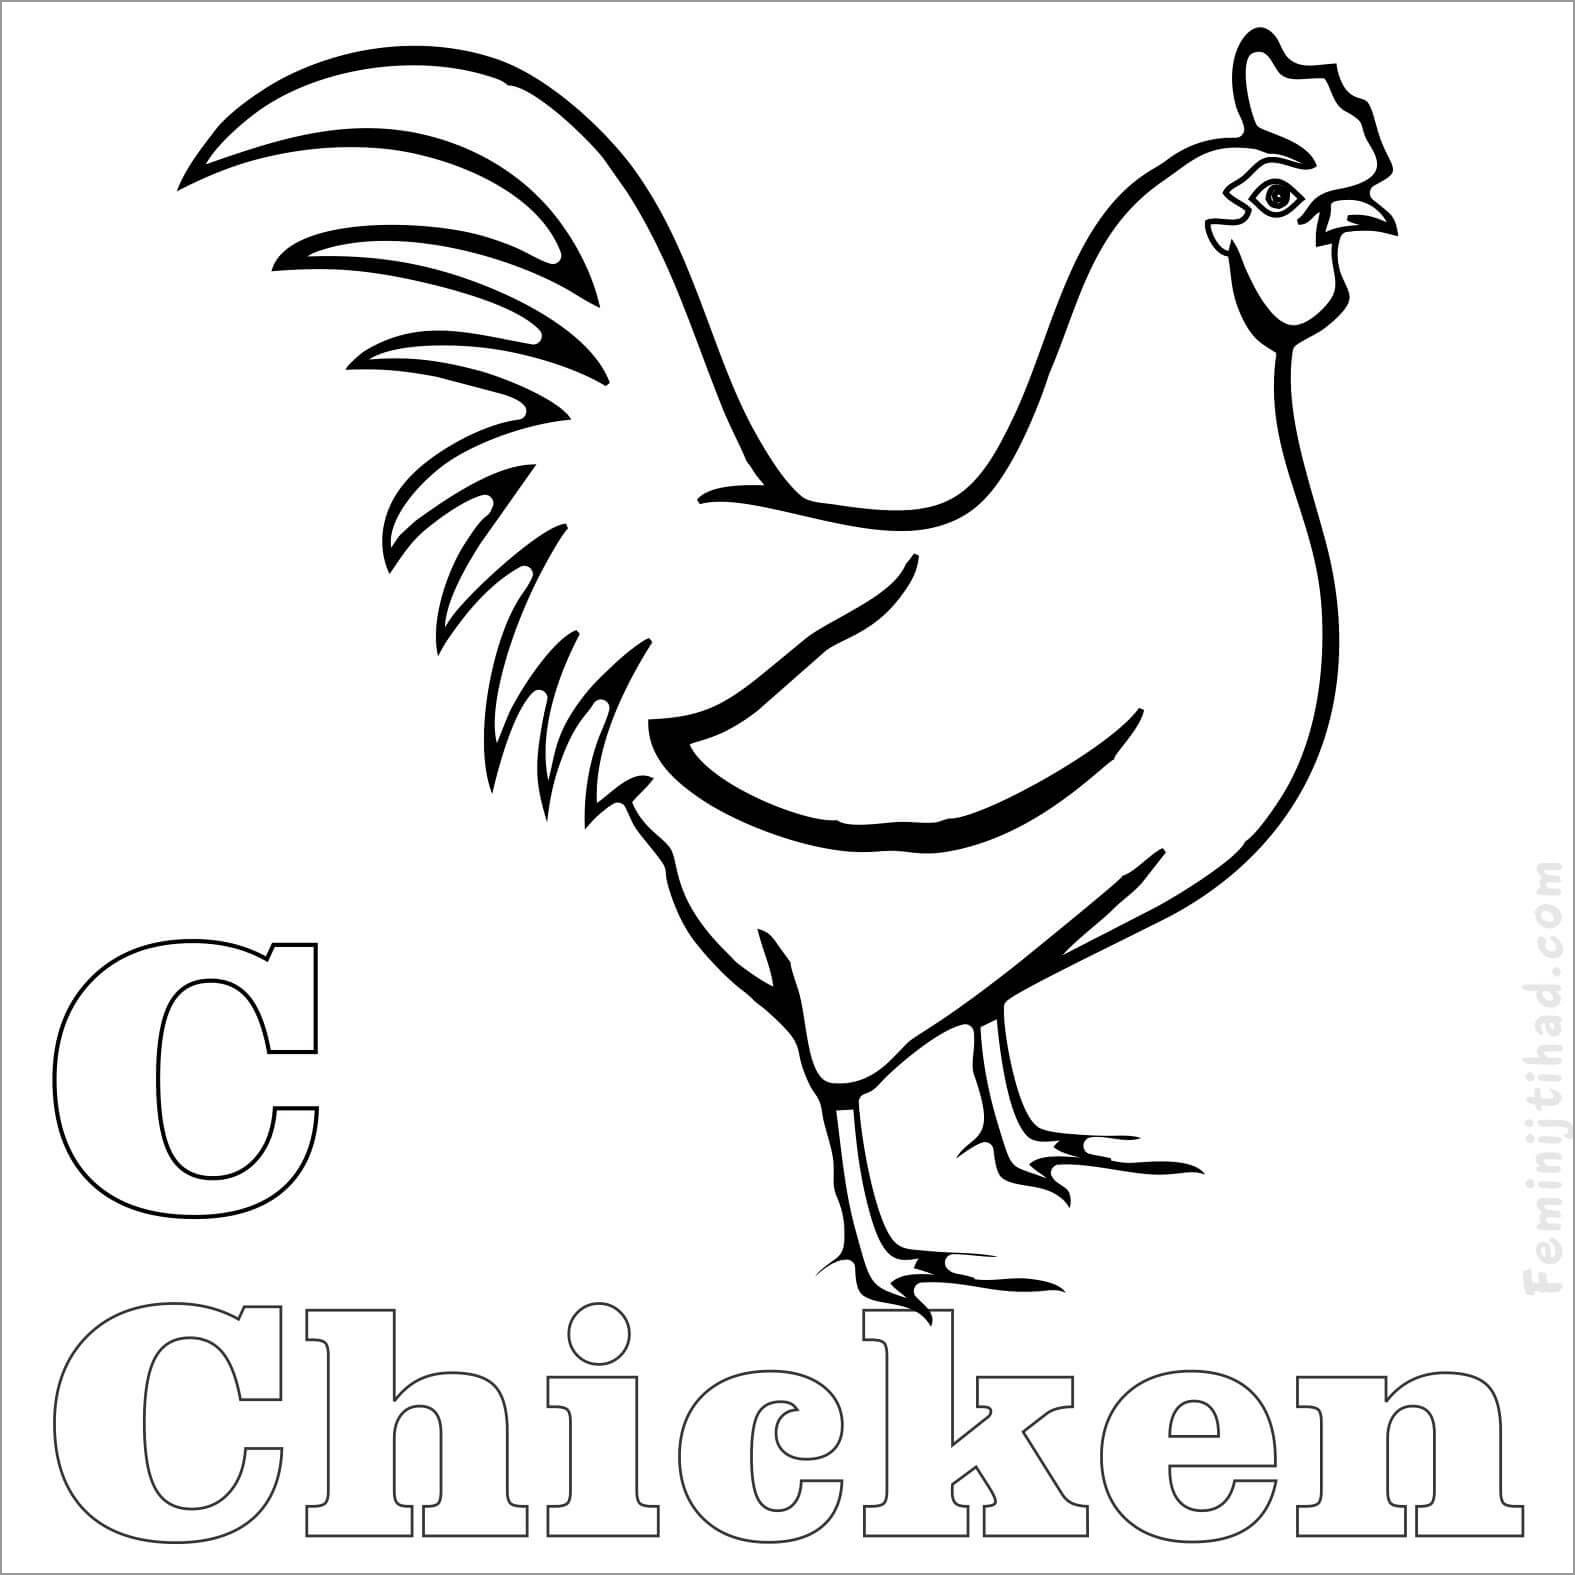 C for Chicken Coloring Page